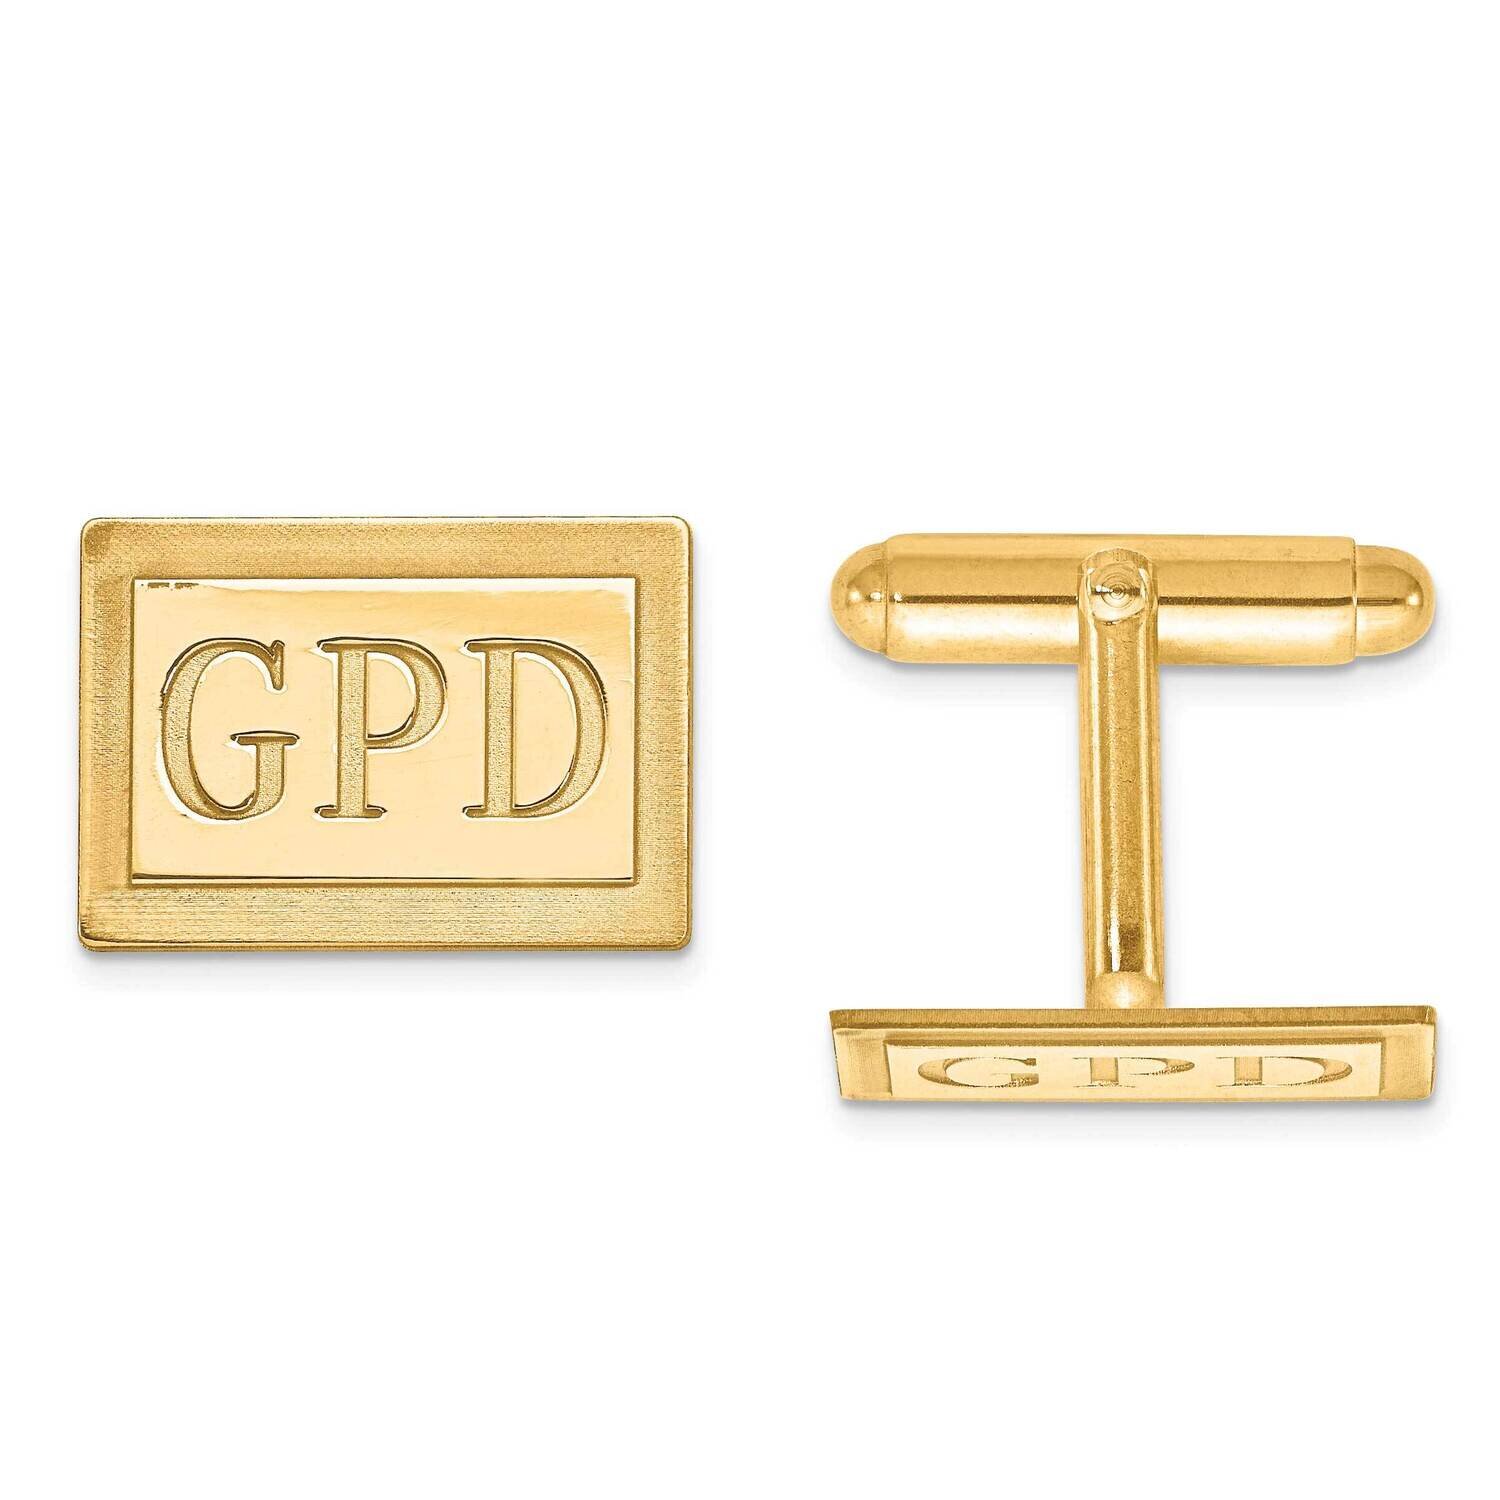 Recessed Letters Rectangle Monogram Cuff Links 14k Gold XNA615Y